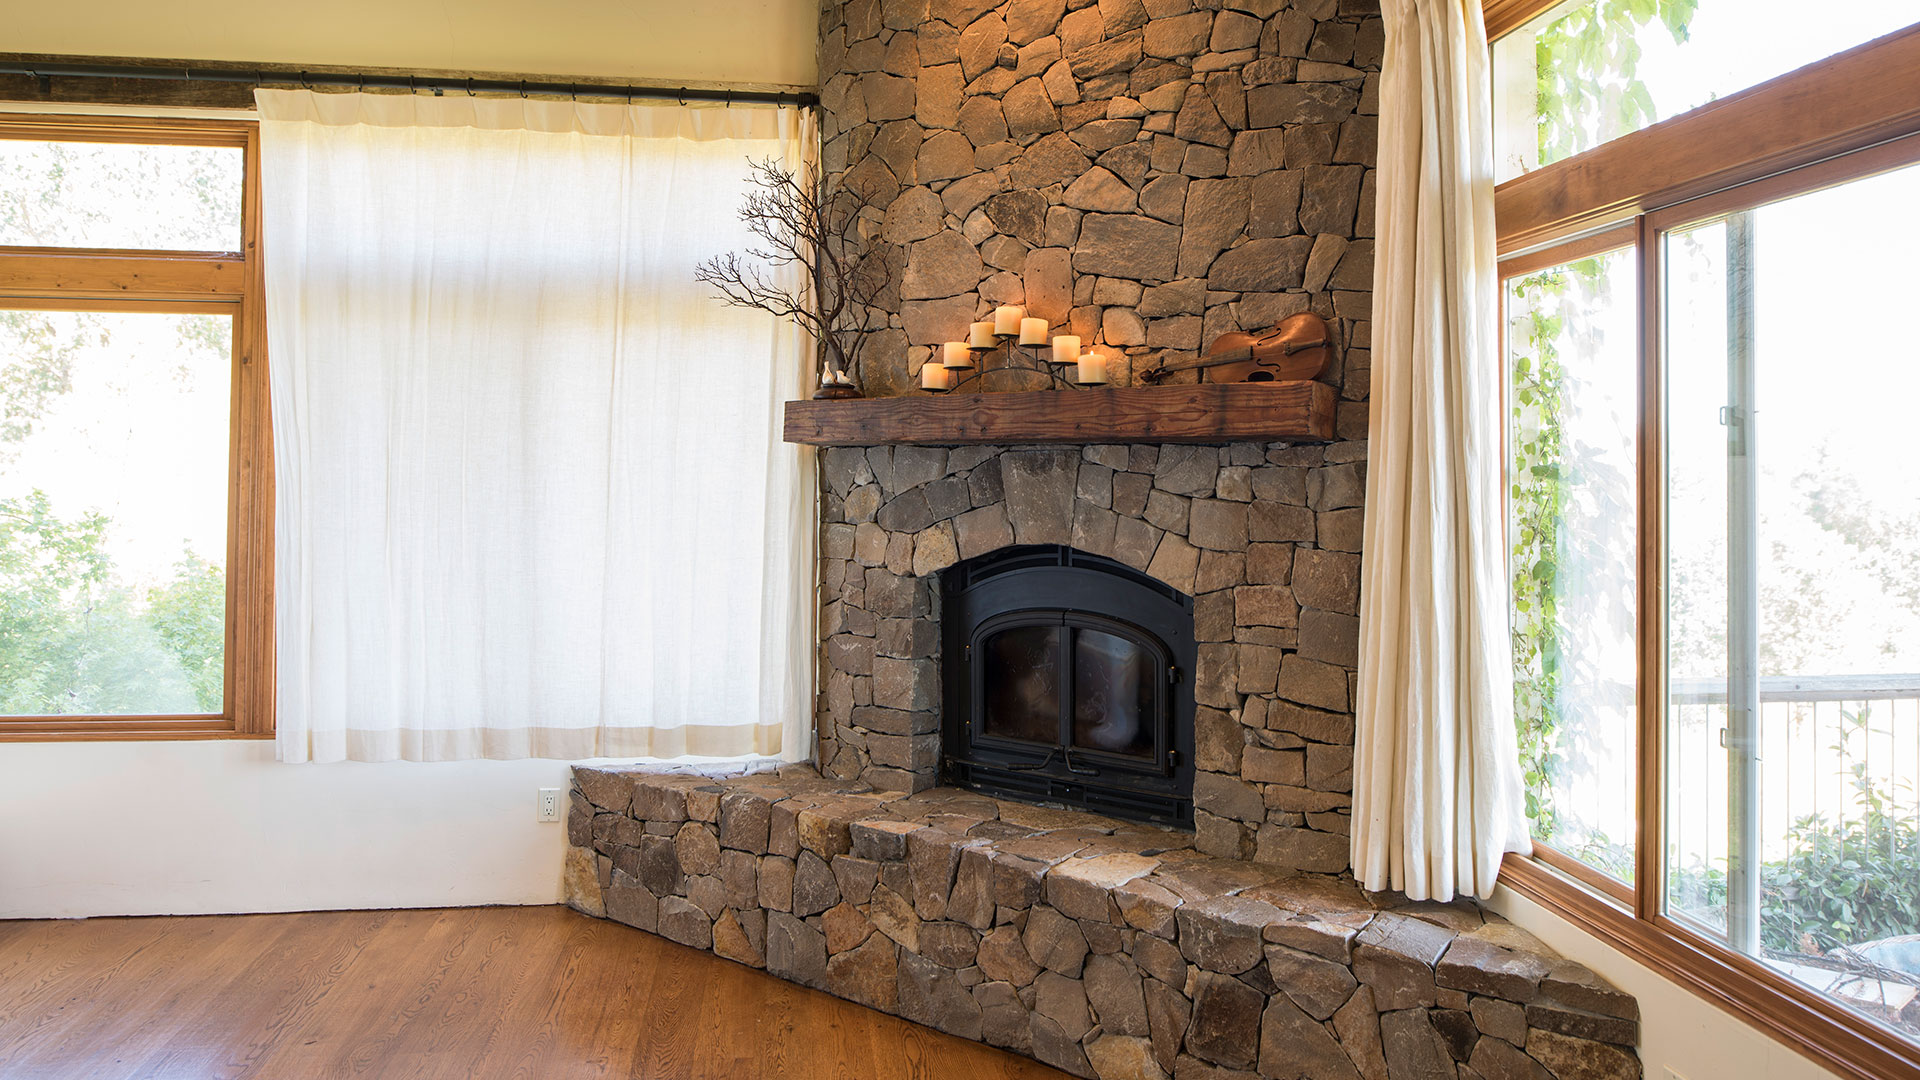 Interior of living room, stacked stone fireplace in corner framed with two large windows behind white drapes.